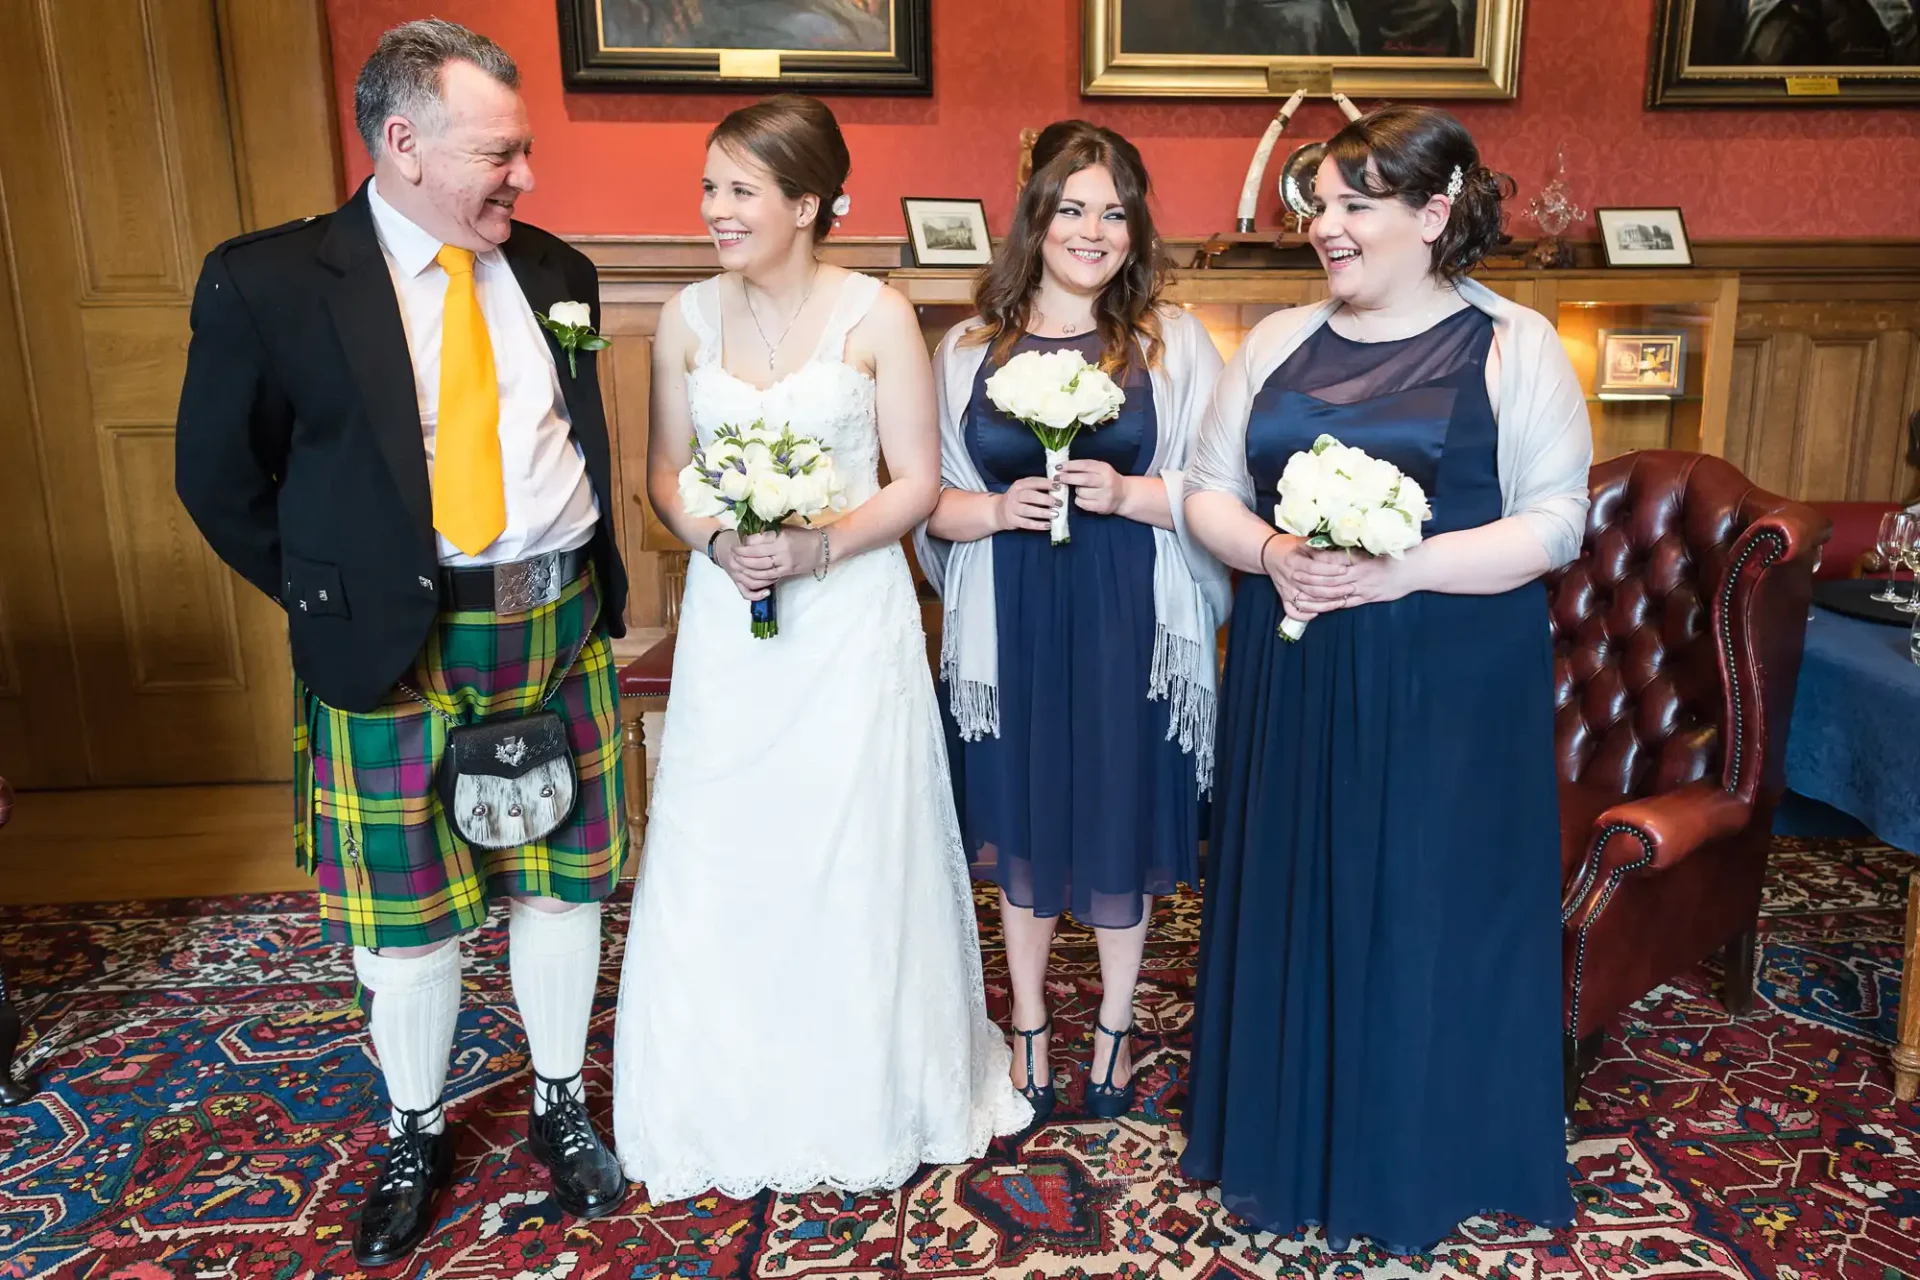 A bride in a white dress stands with her father in a tartan kilt and two bridesmaids in navy dresses, all holding bouquets, in an elegant room.